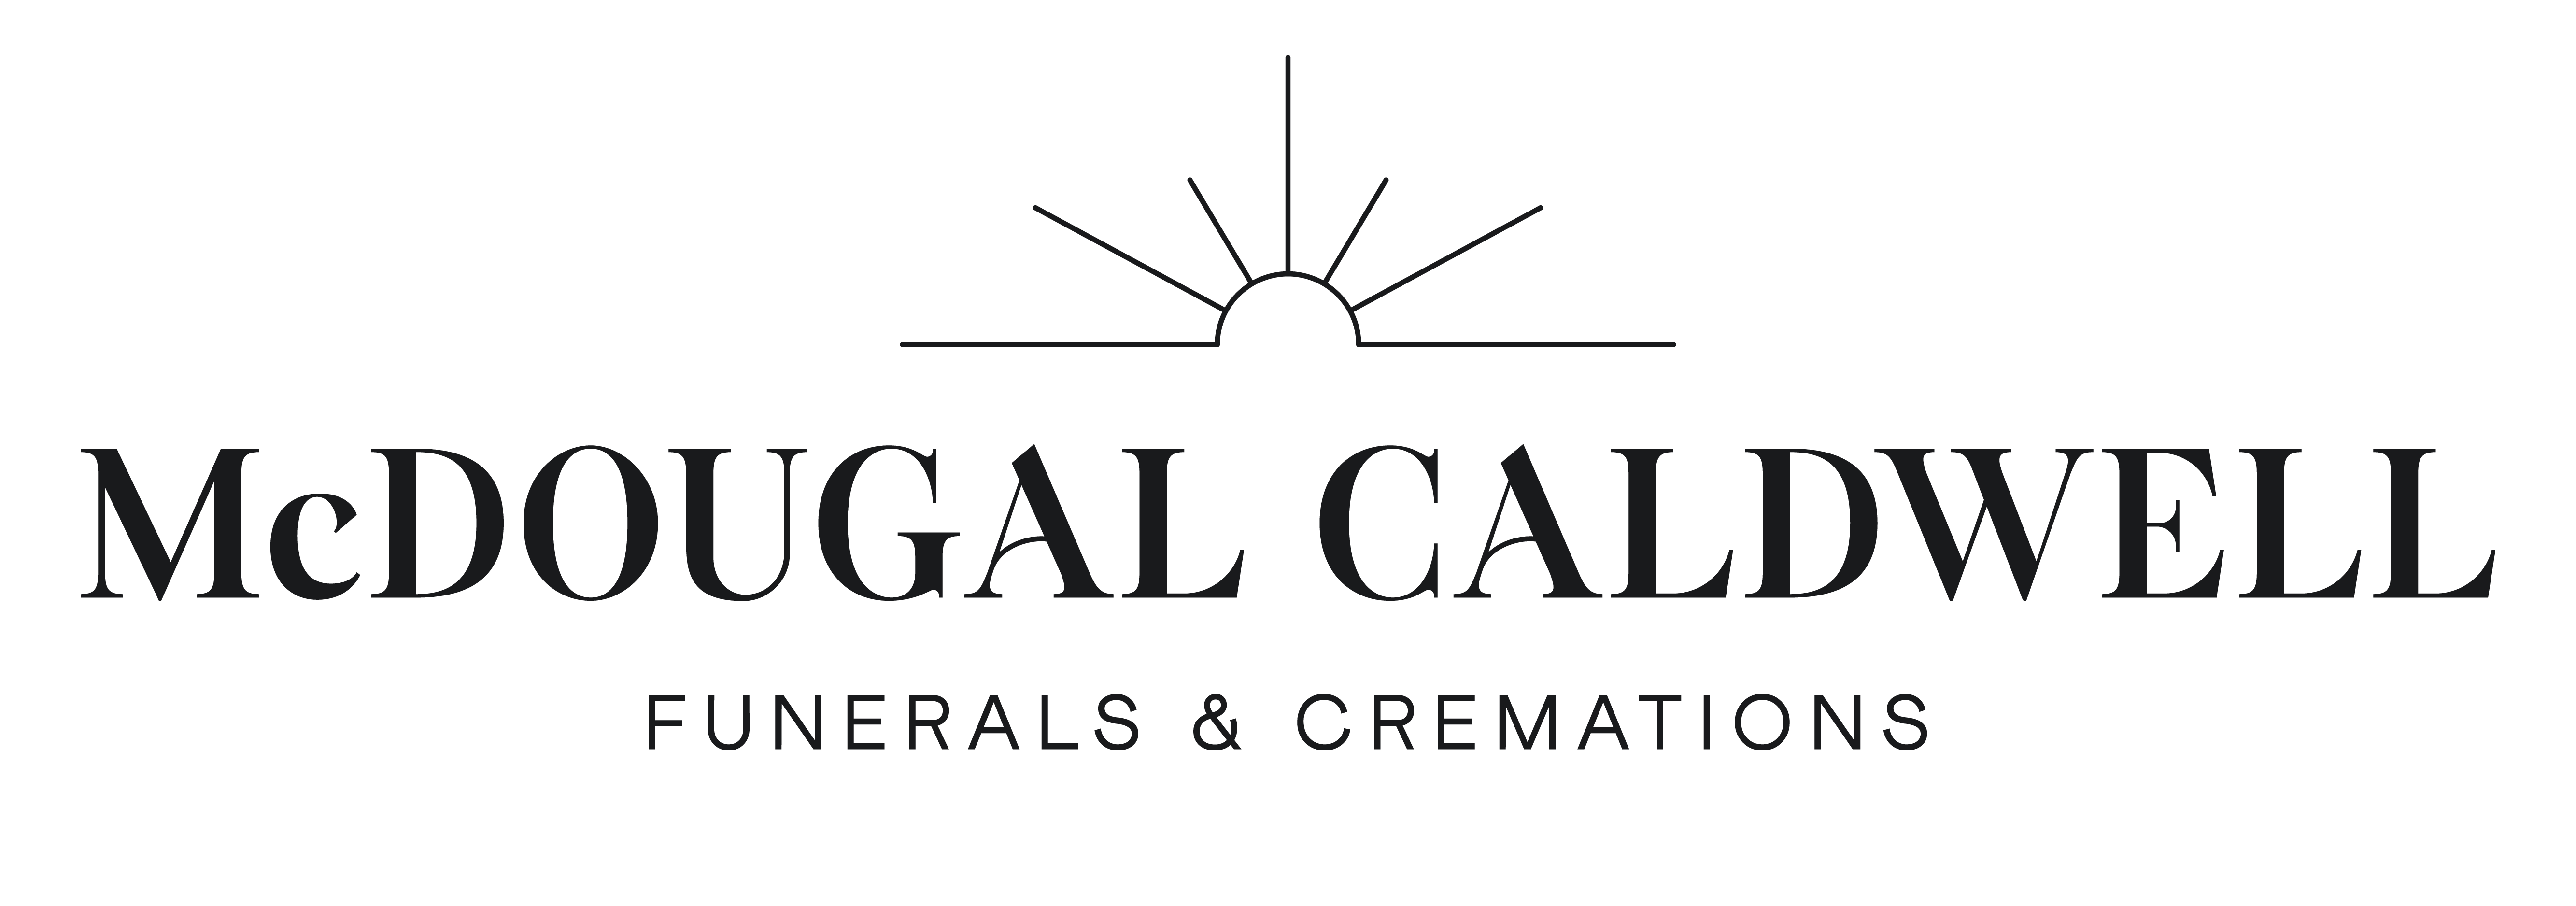 new mcdougal caldwell funerals and cremation logo black